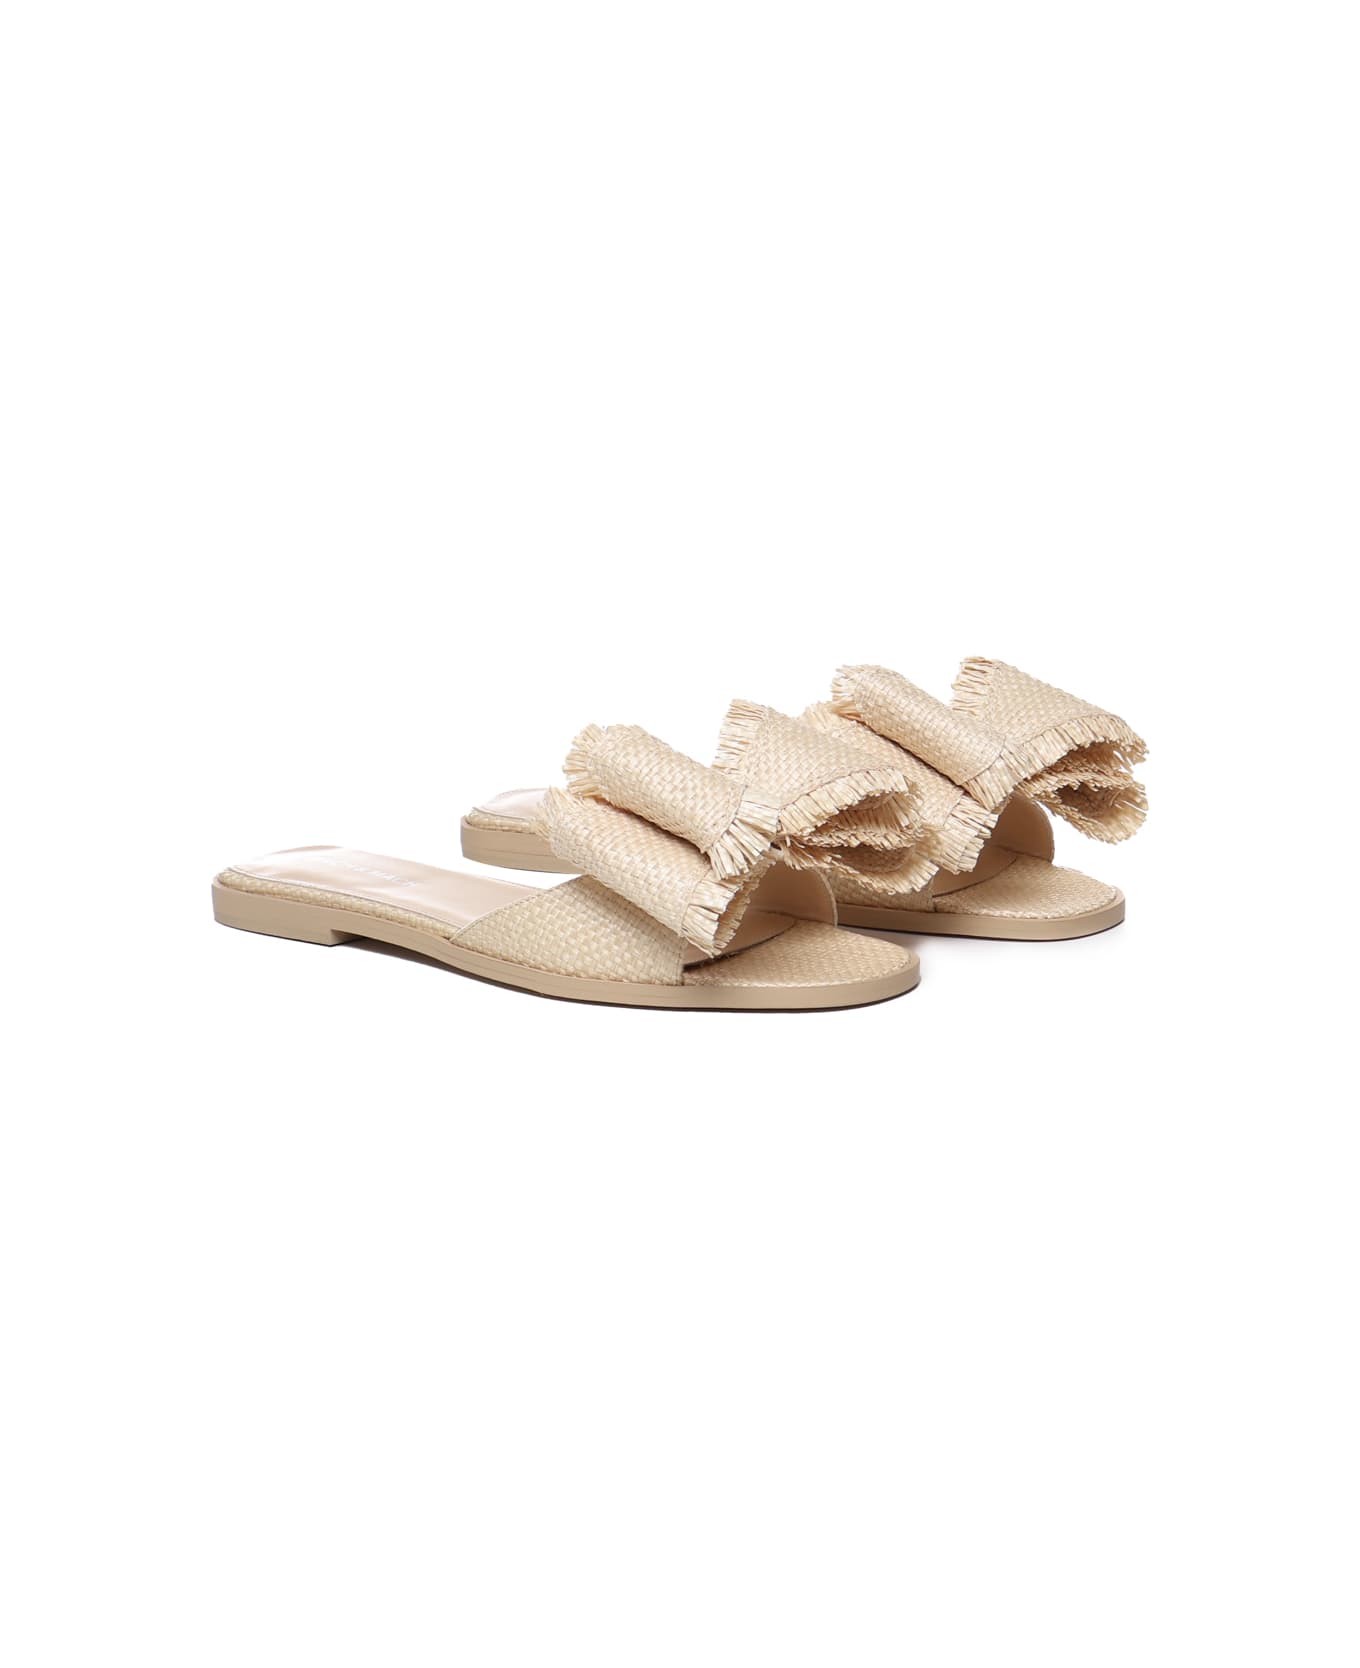 Mach & Mach Flat Sandal In Rope And Leather - Beige